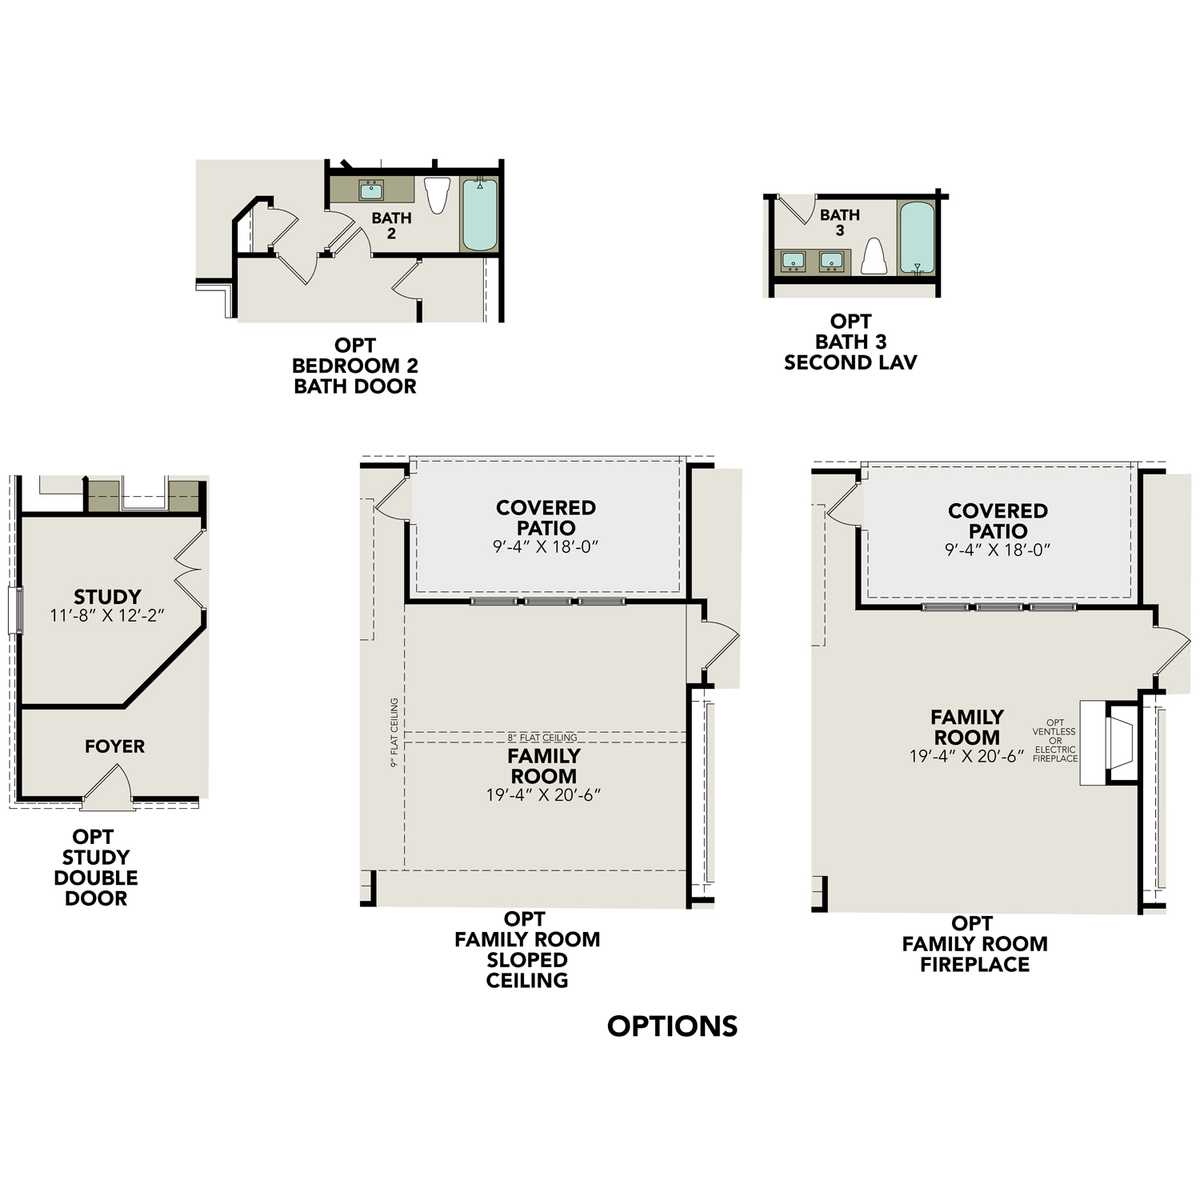 4 - The Jennings G floor plan layout for 248 Jereth Crossing in Davidson Homes' The Reserve at Potranco Oaks community.